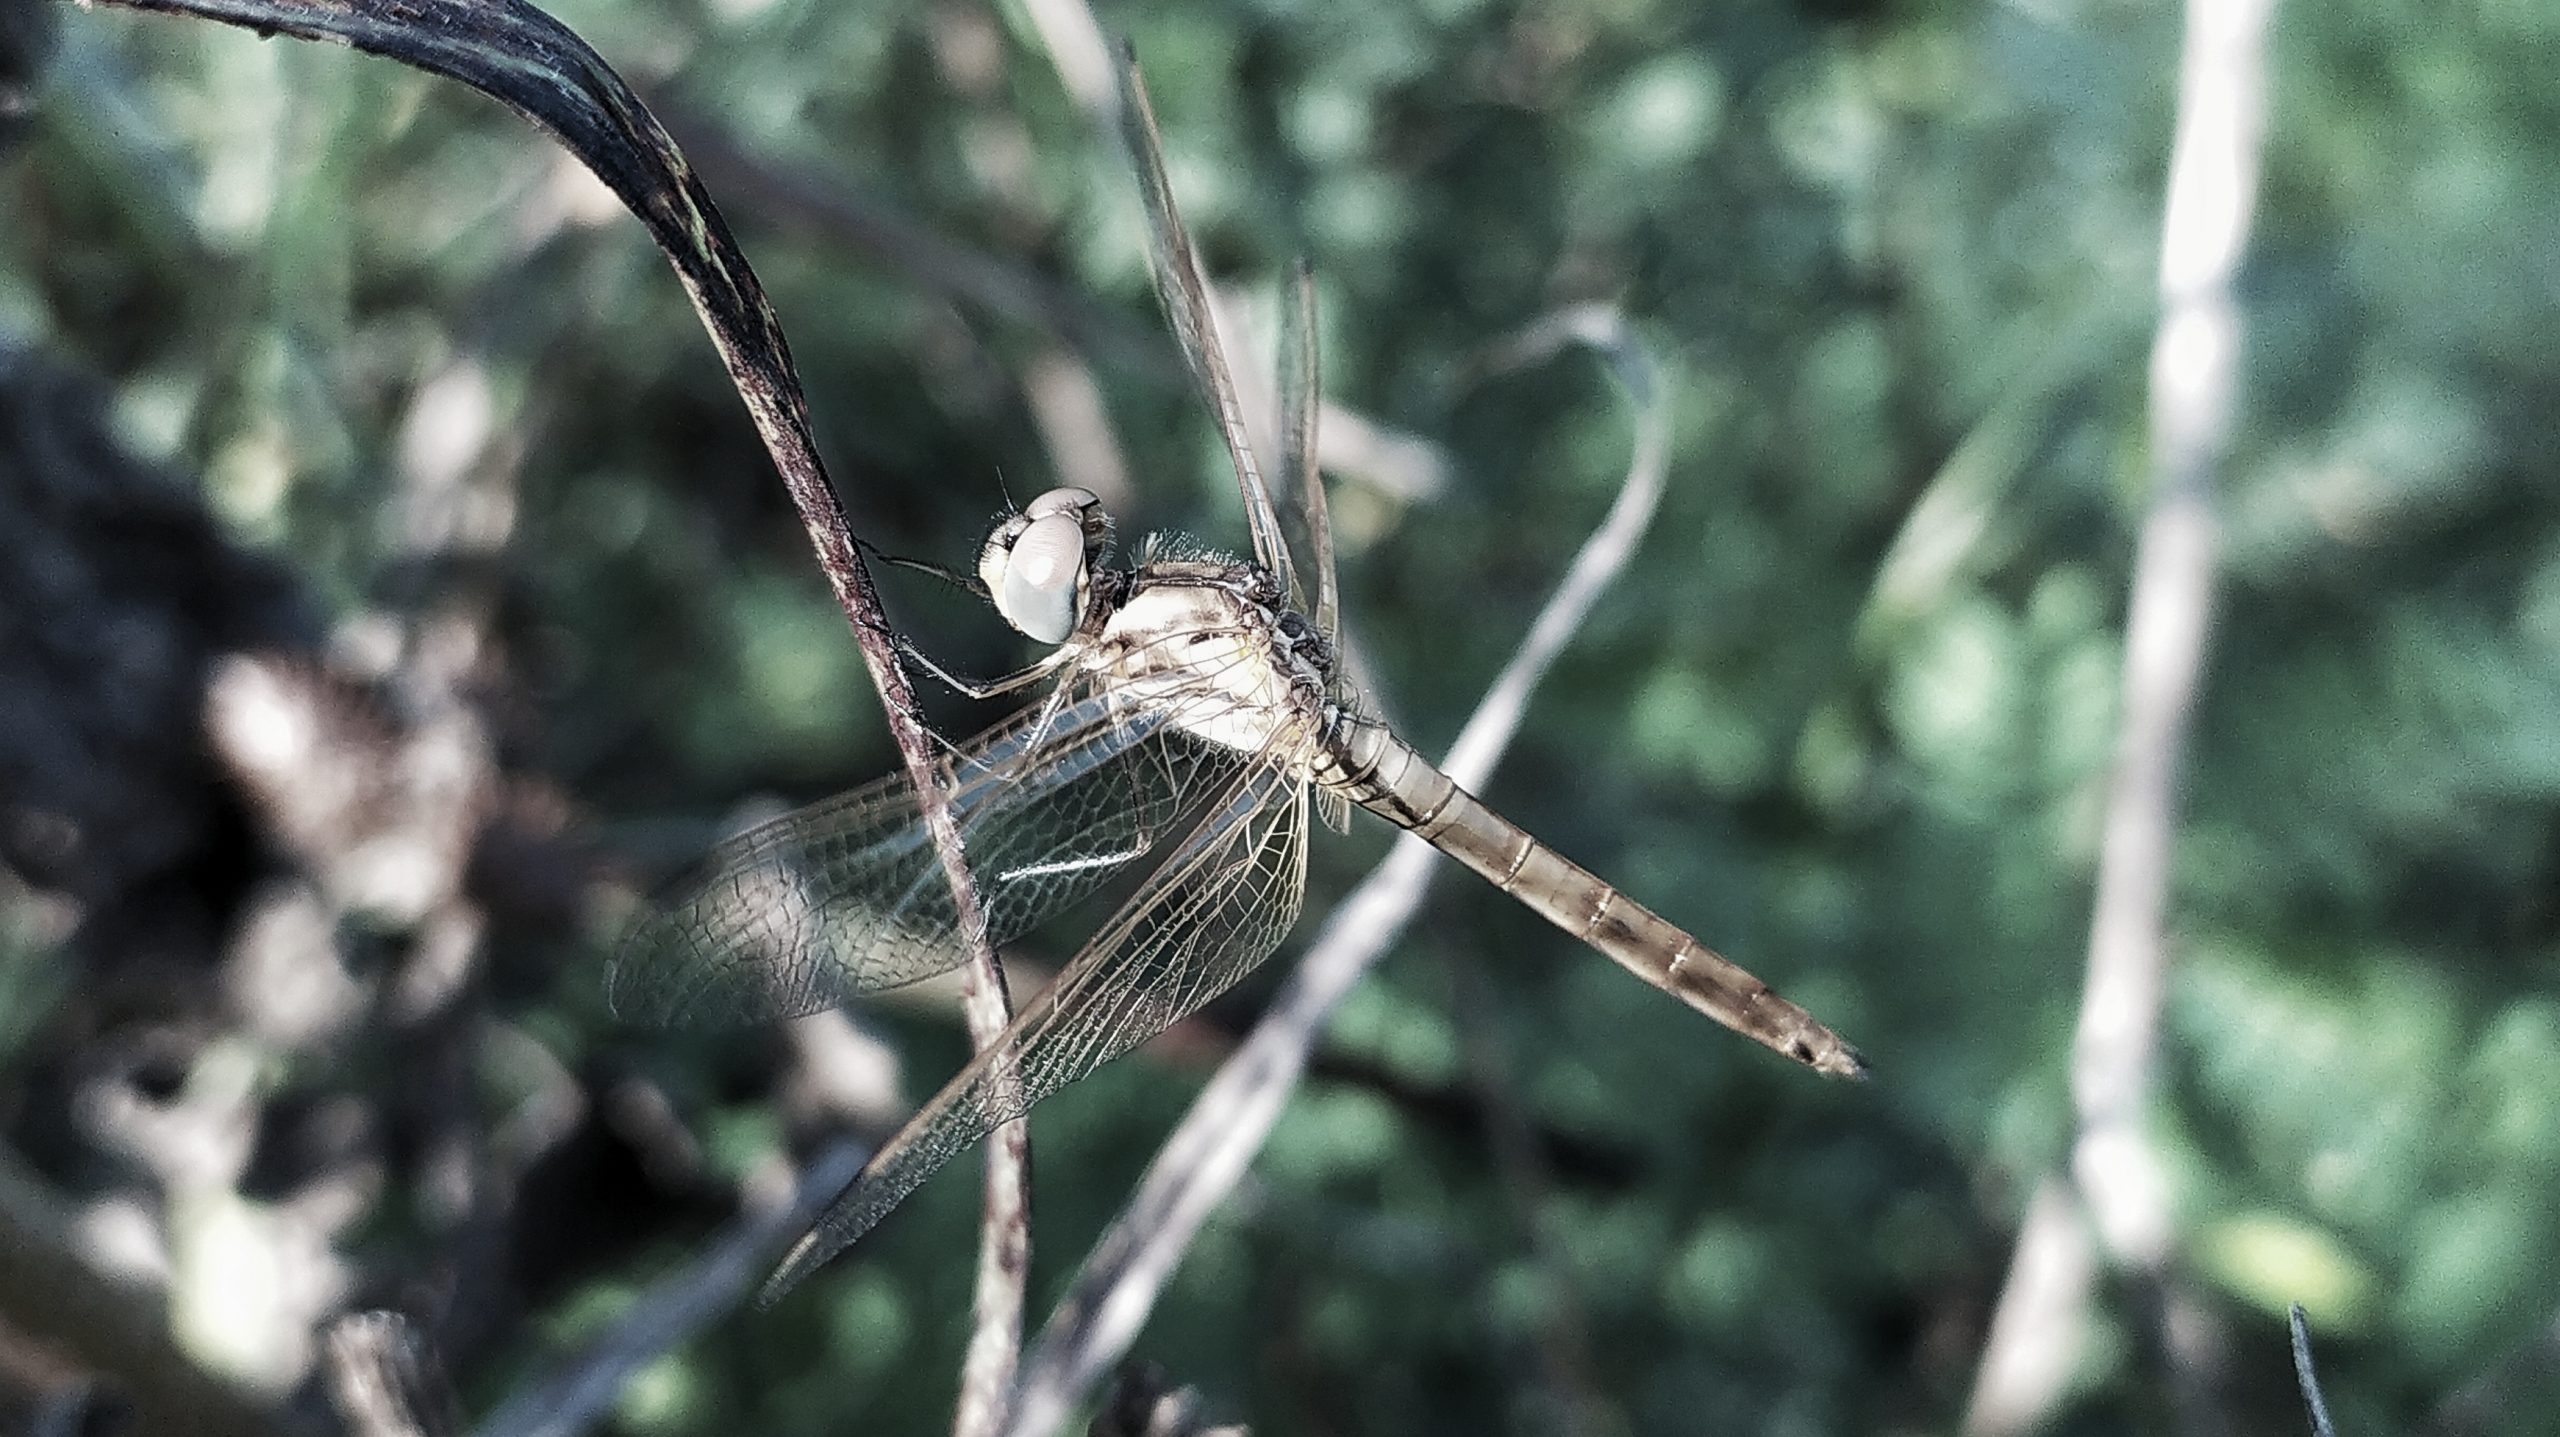 A dragonfly on plant